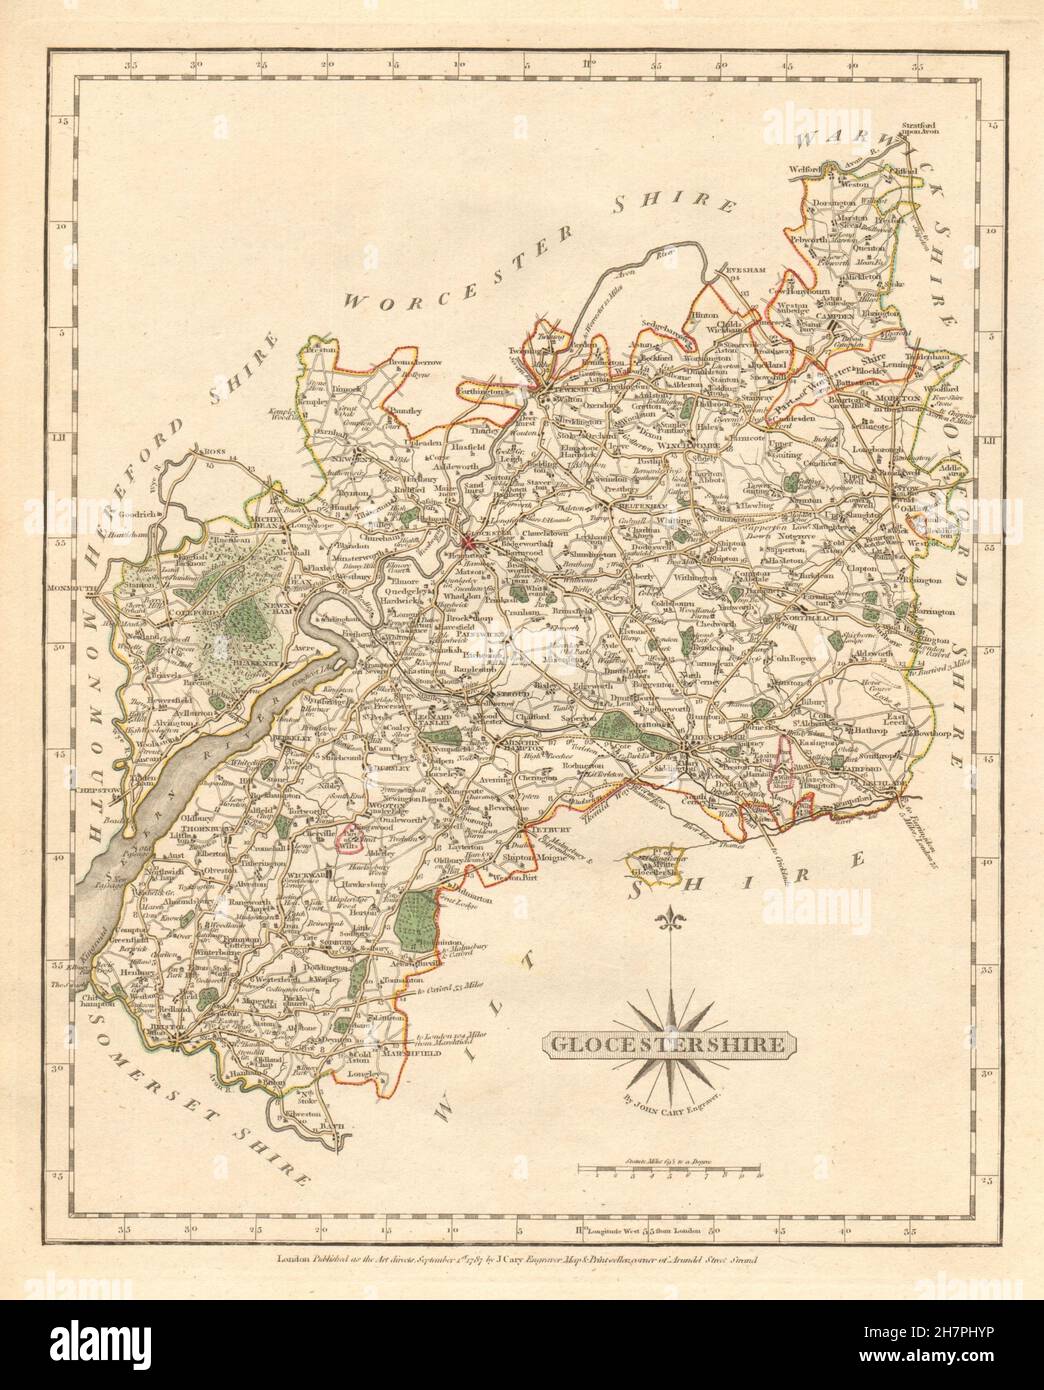 Antique county map of WORCESTERSHIRE by JOHN CARY Original outline colour 1787 